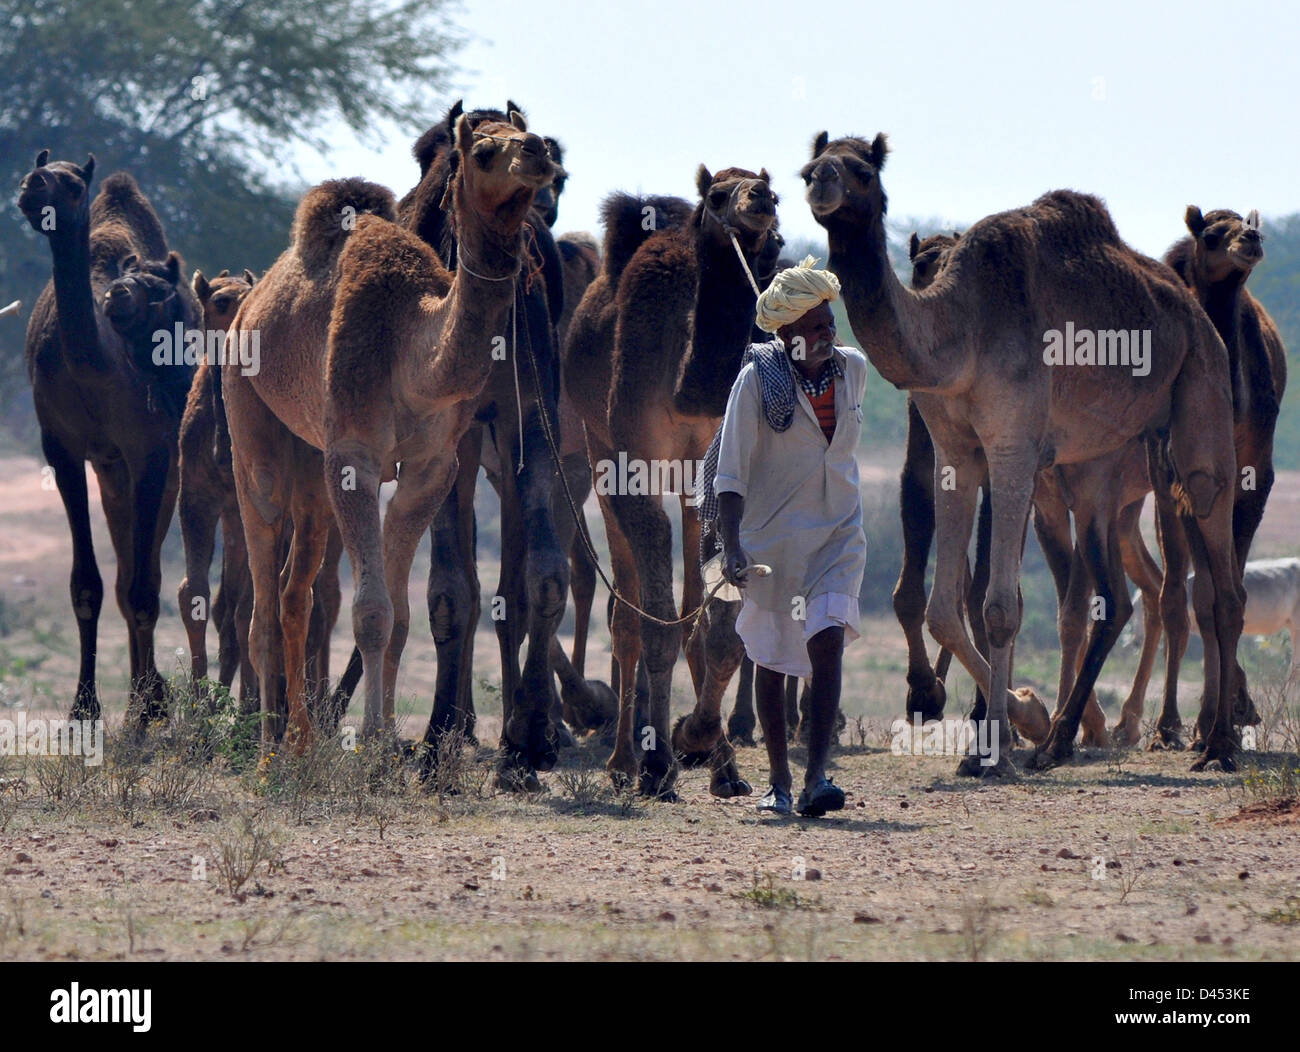 A farmer herding camles at cattle fair in western Indian town of Nagaur, in Rajasthan state Stock Photo